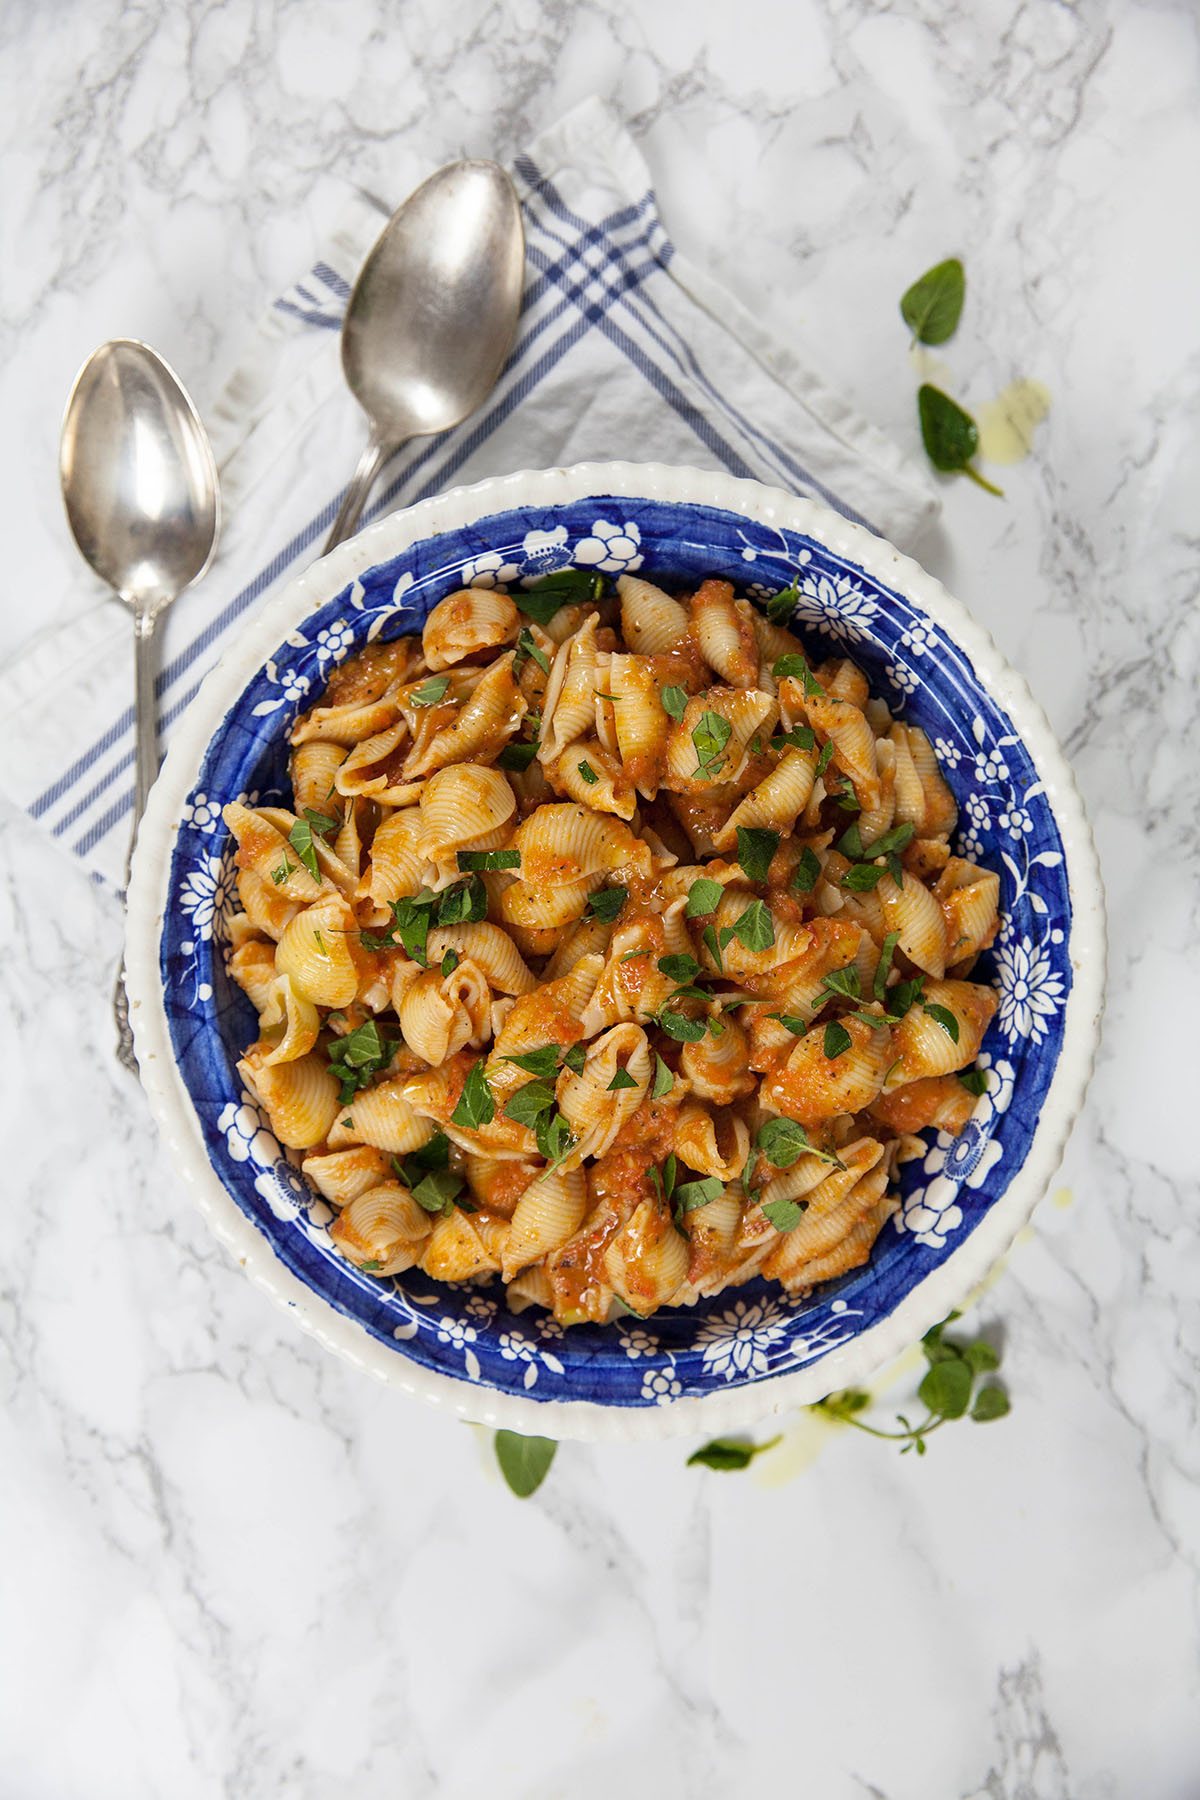 Blended Chickpea and Pan Roasted Tomato Sauce